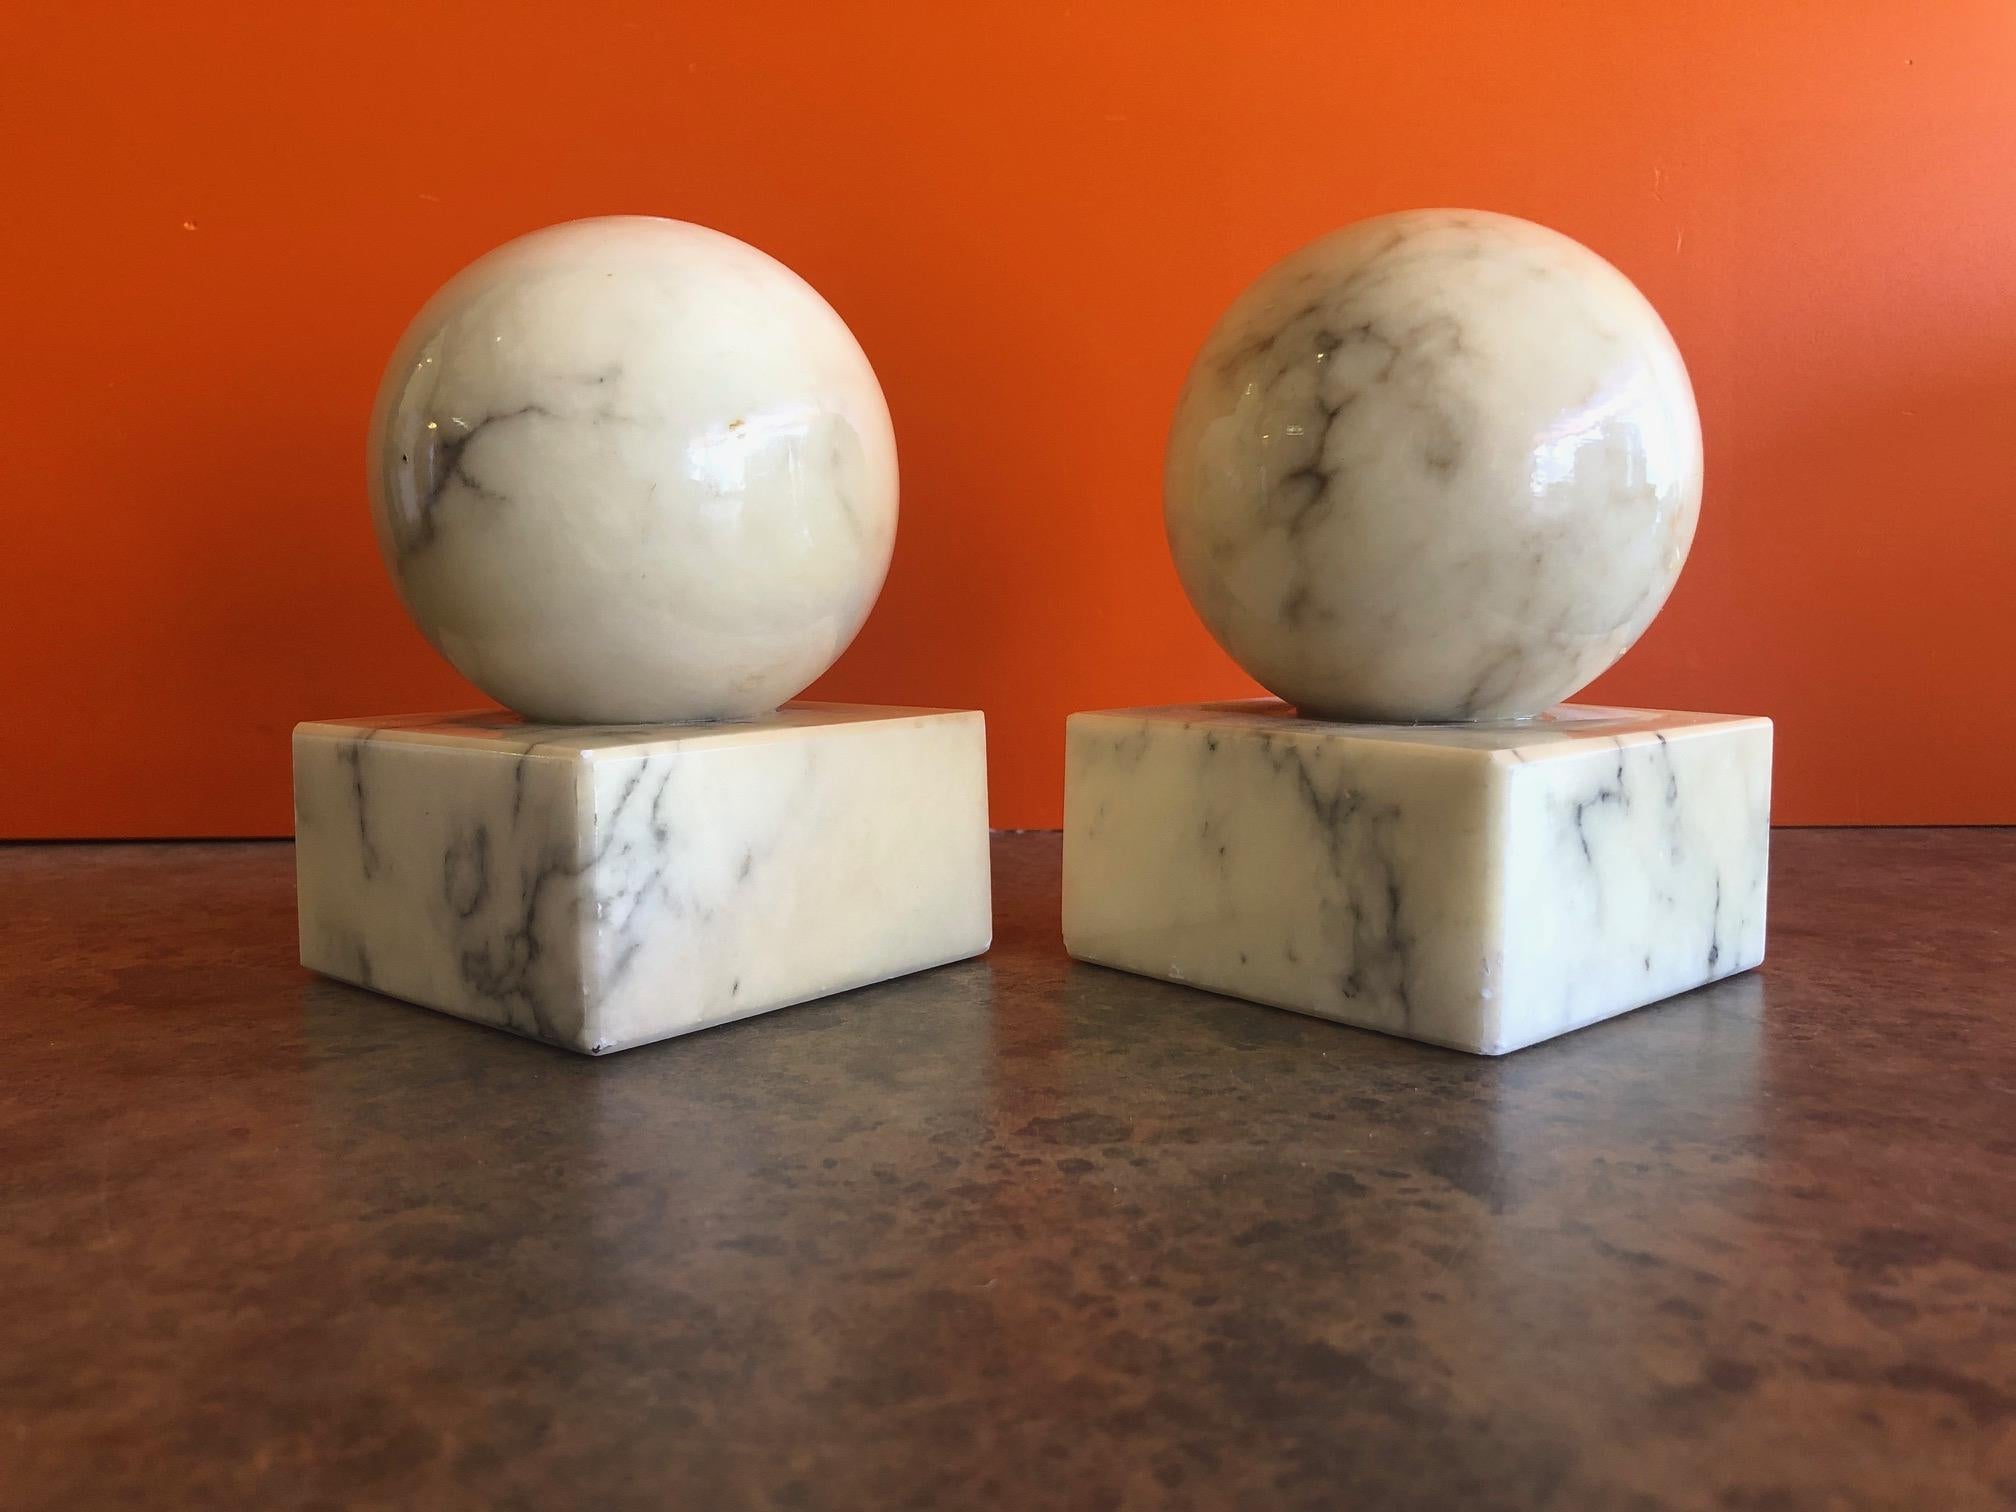 Nice pair of round modernist solid marble bookends in white, circa 1970s. The pair has a 3